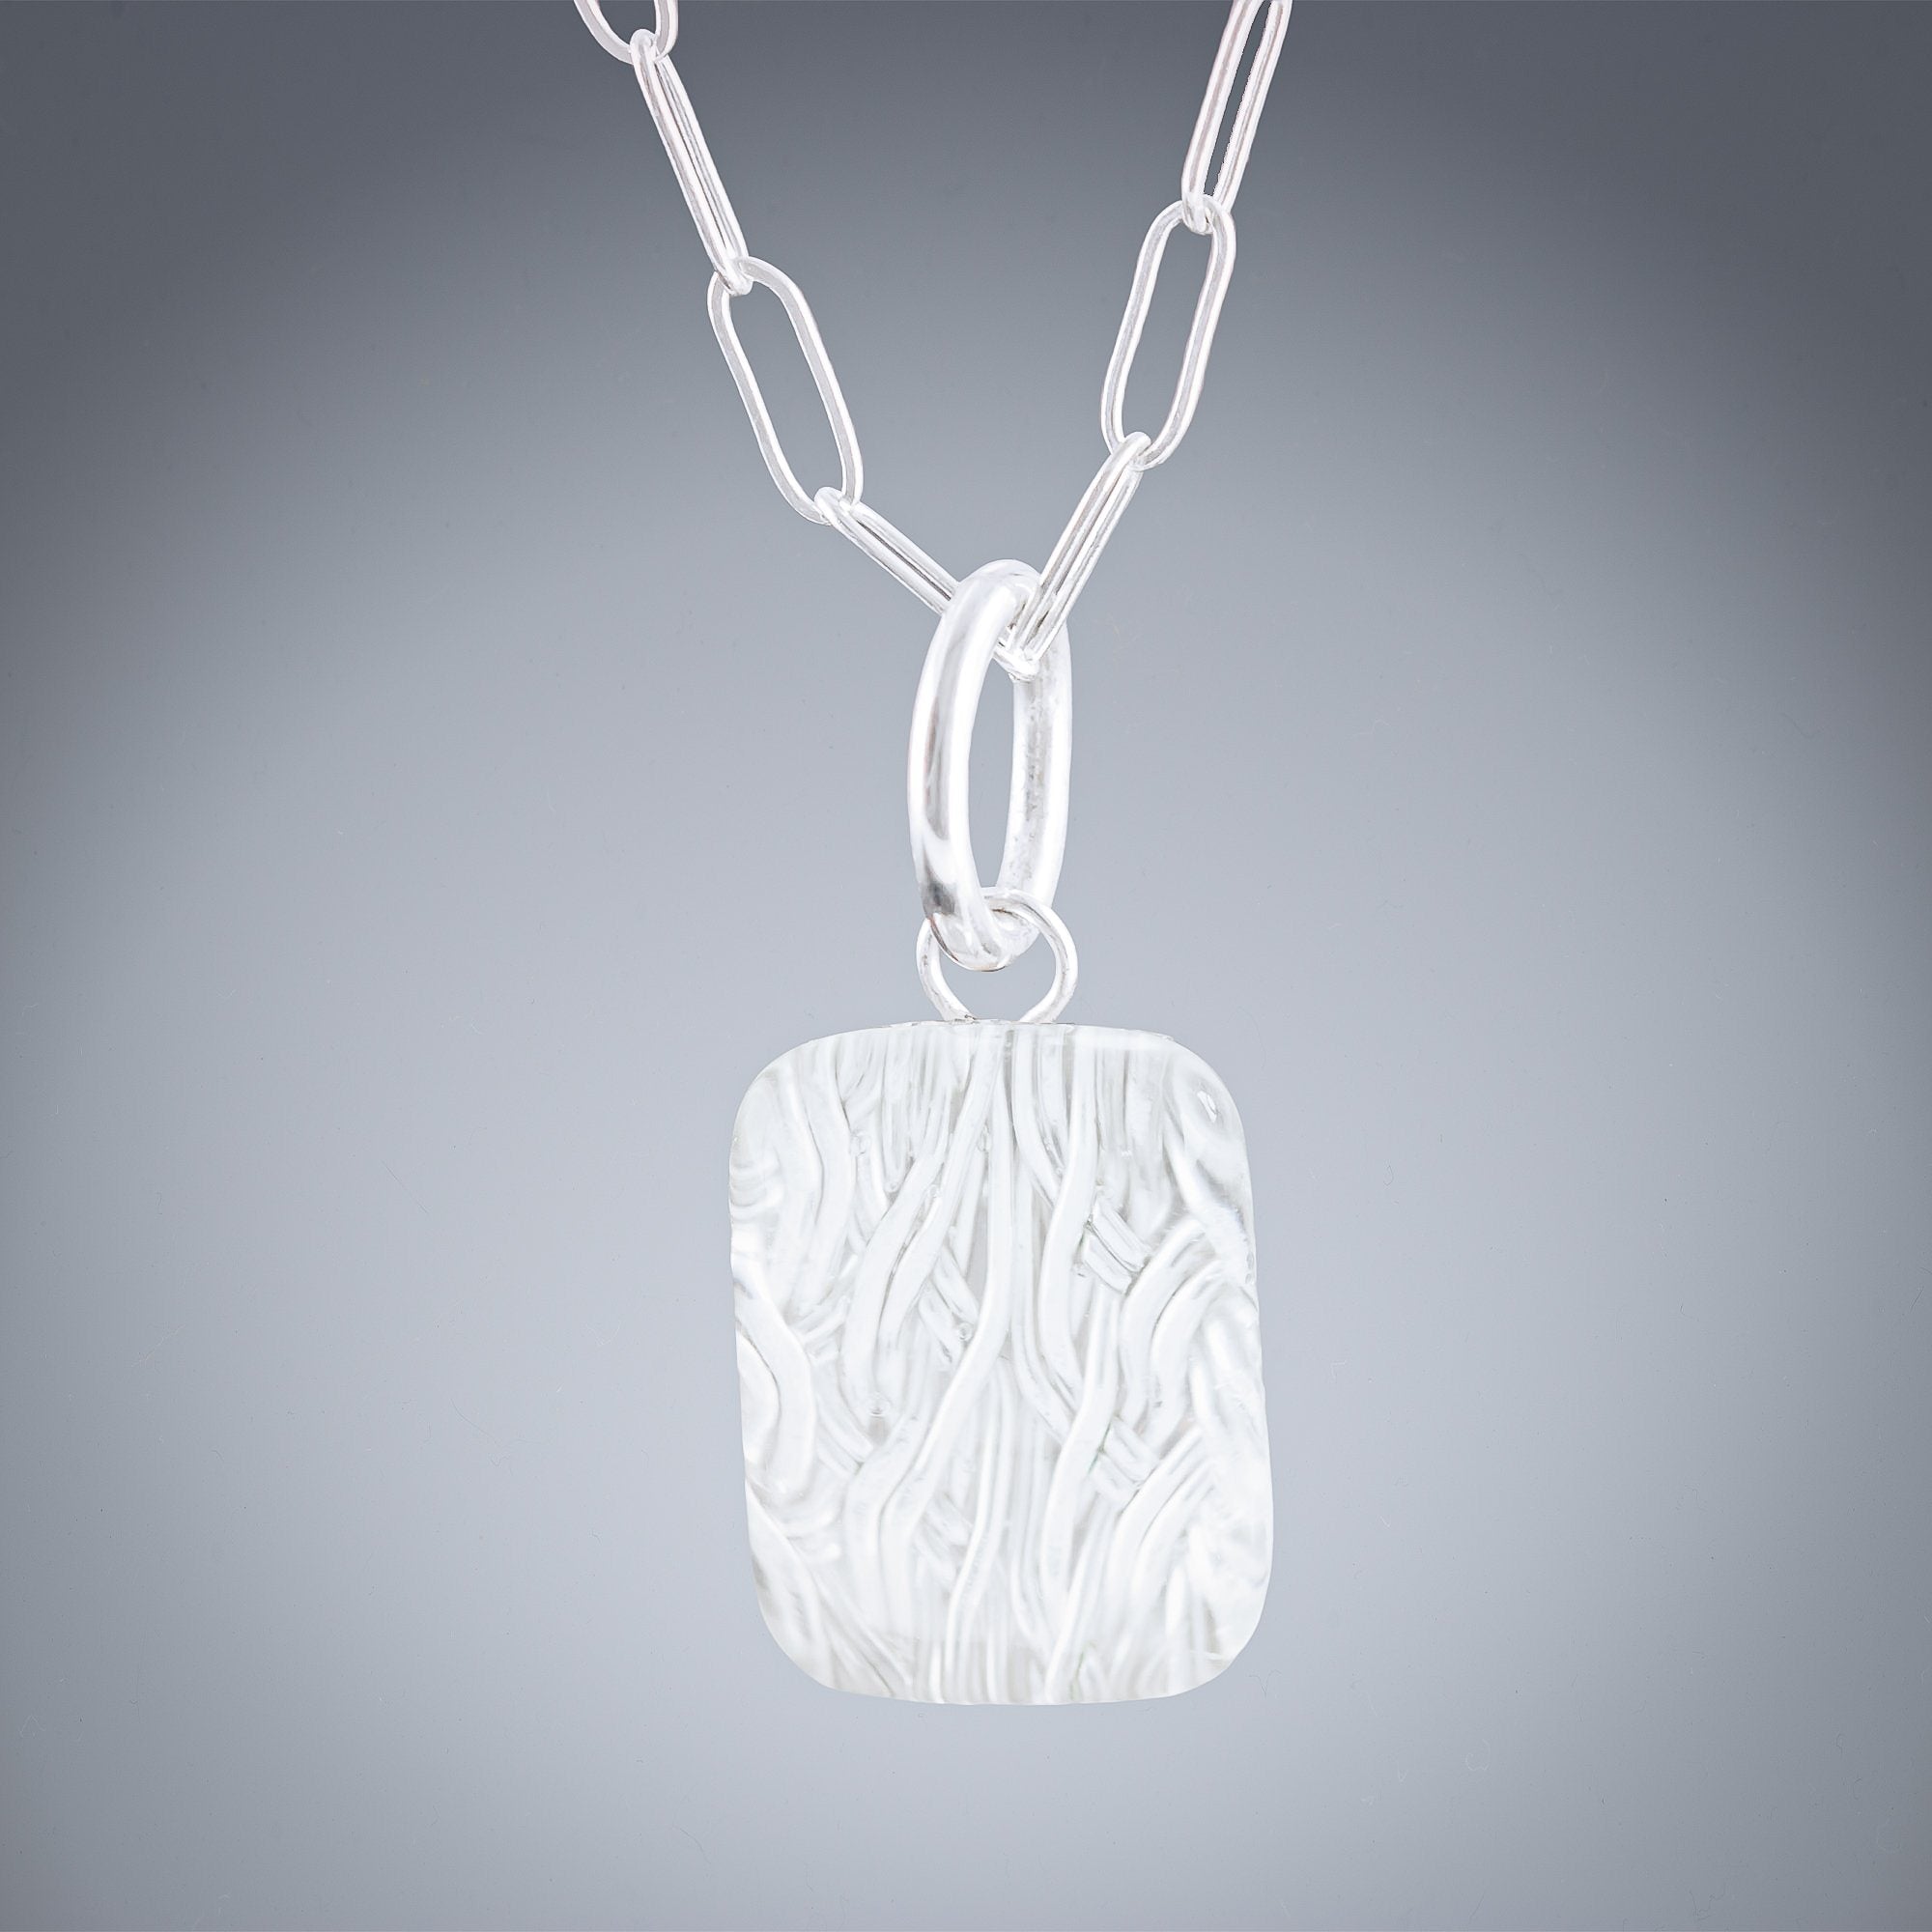 Small Sparkly Rectangle Shaped Pendant Necklace with Handwoven Metal Fabric and Glass in Silver